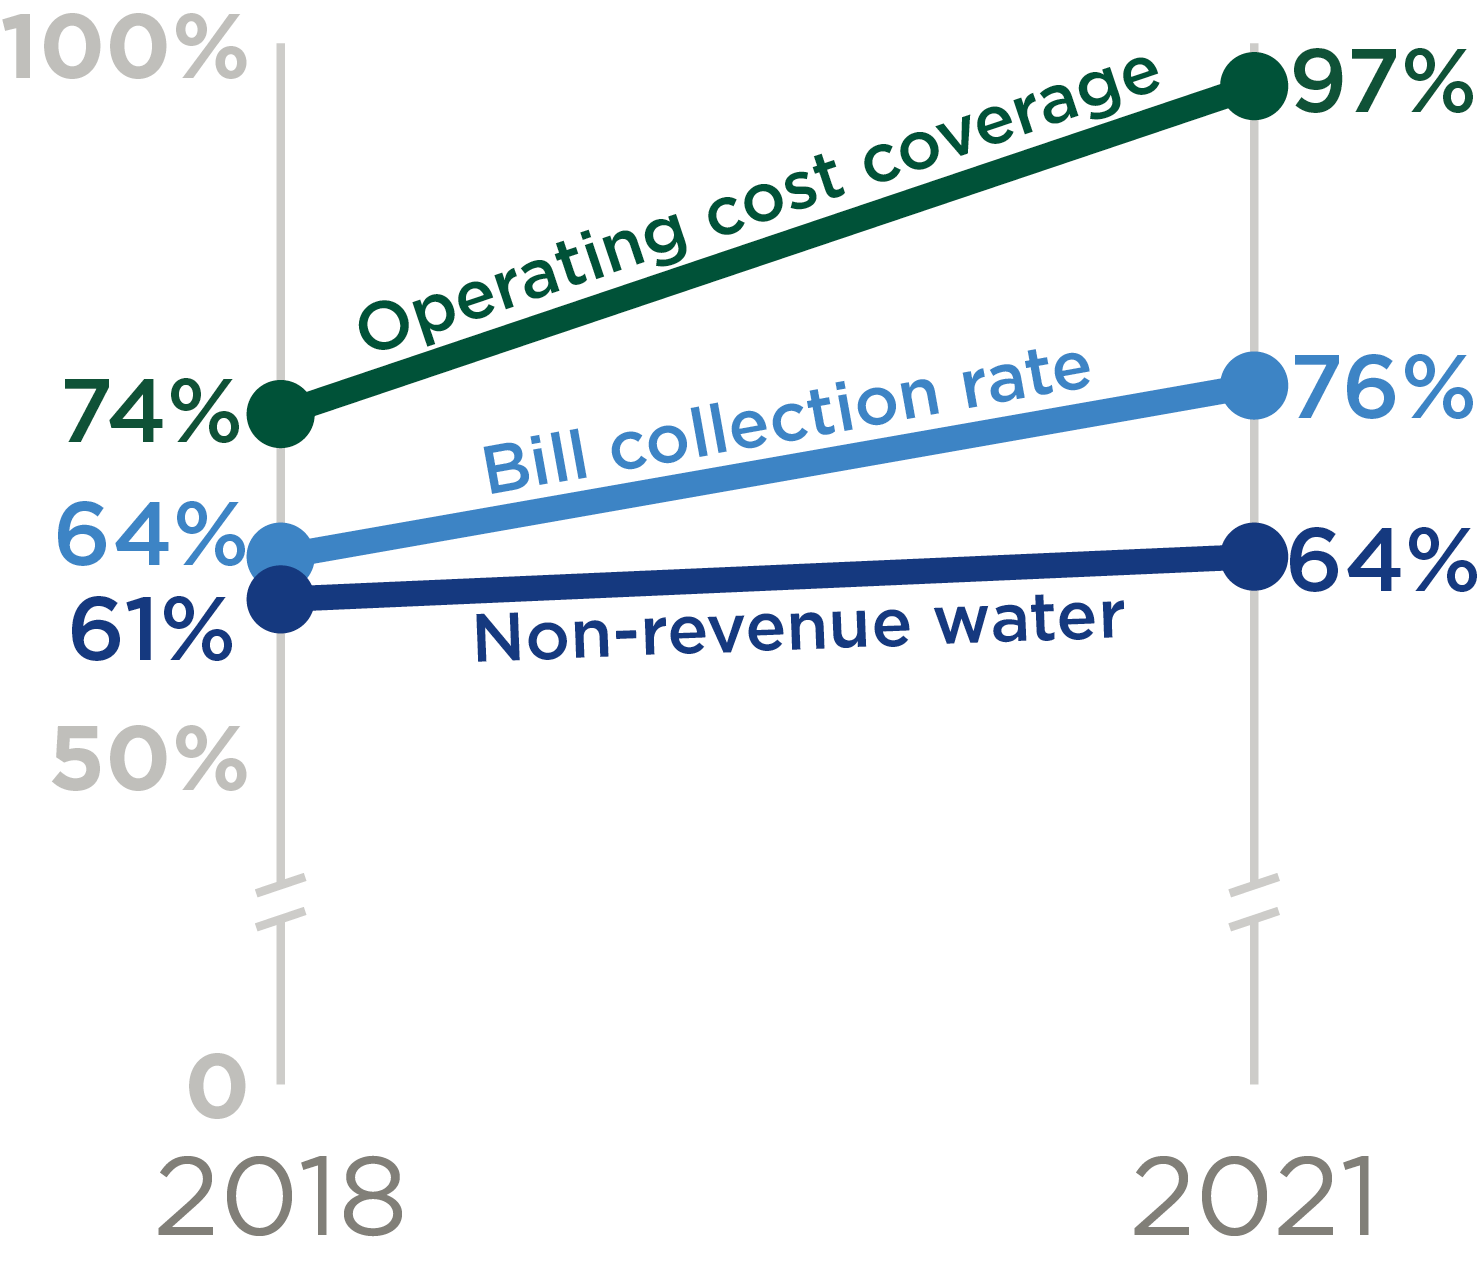 From 2018 to 2021, operating cost coverage rose from 74% to 97%; bill collection rate rose from 64% to 76%. Non-revenue water (water that leaks or is not billed to customers) also rose from 61% to 64%. 